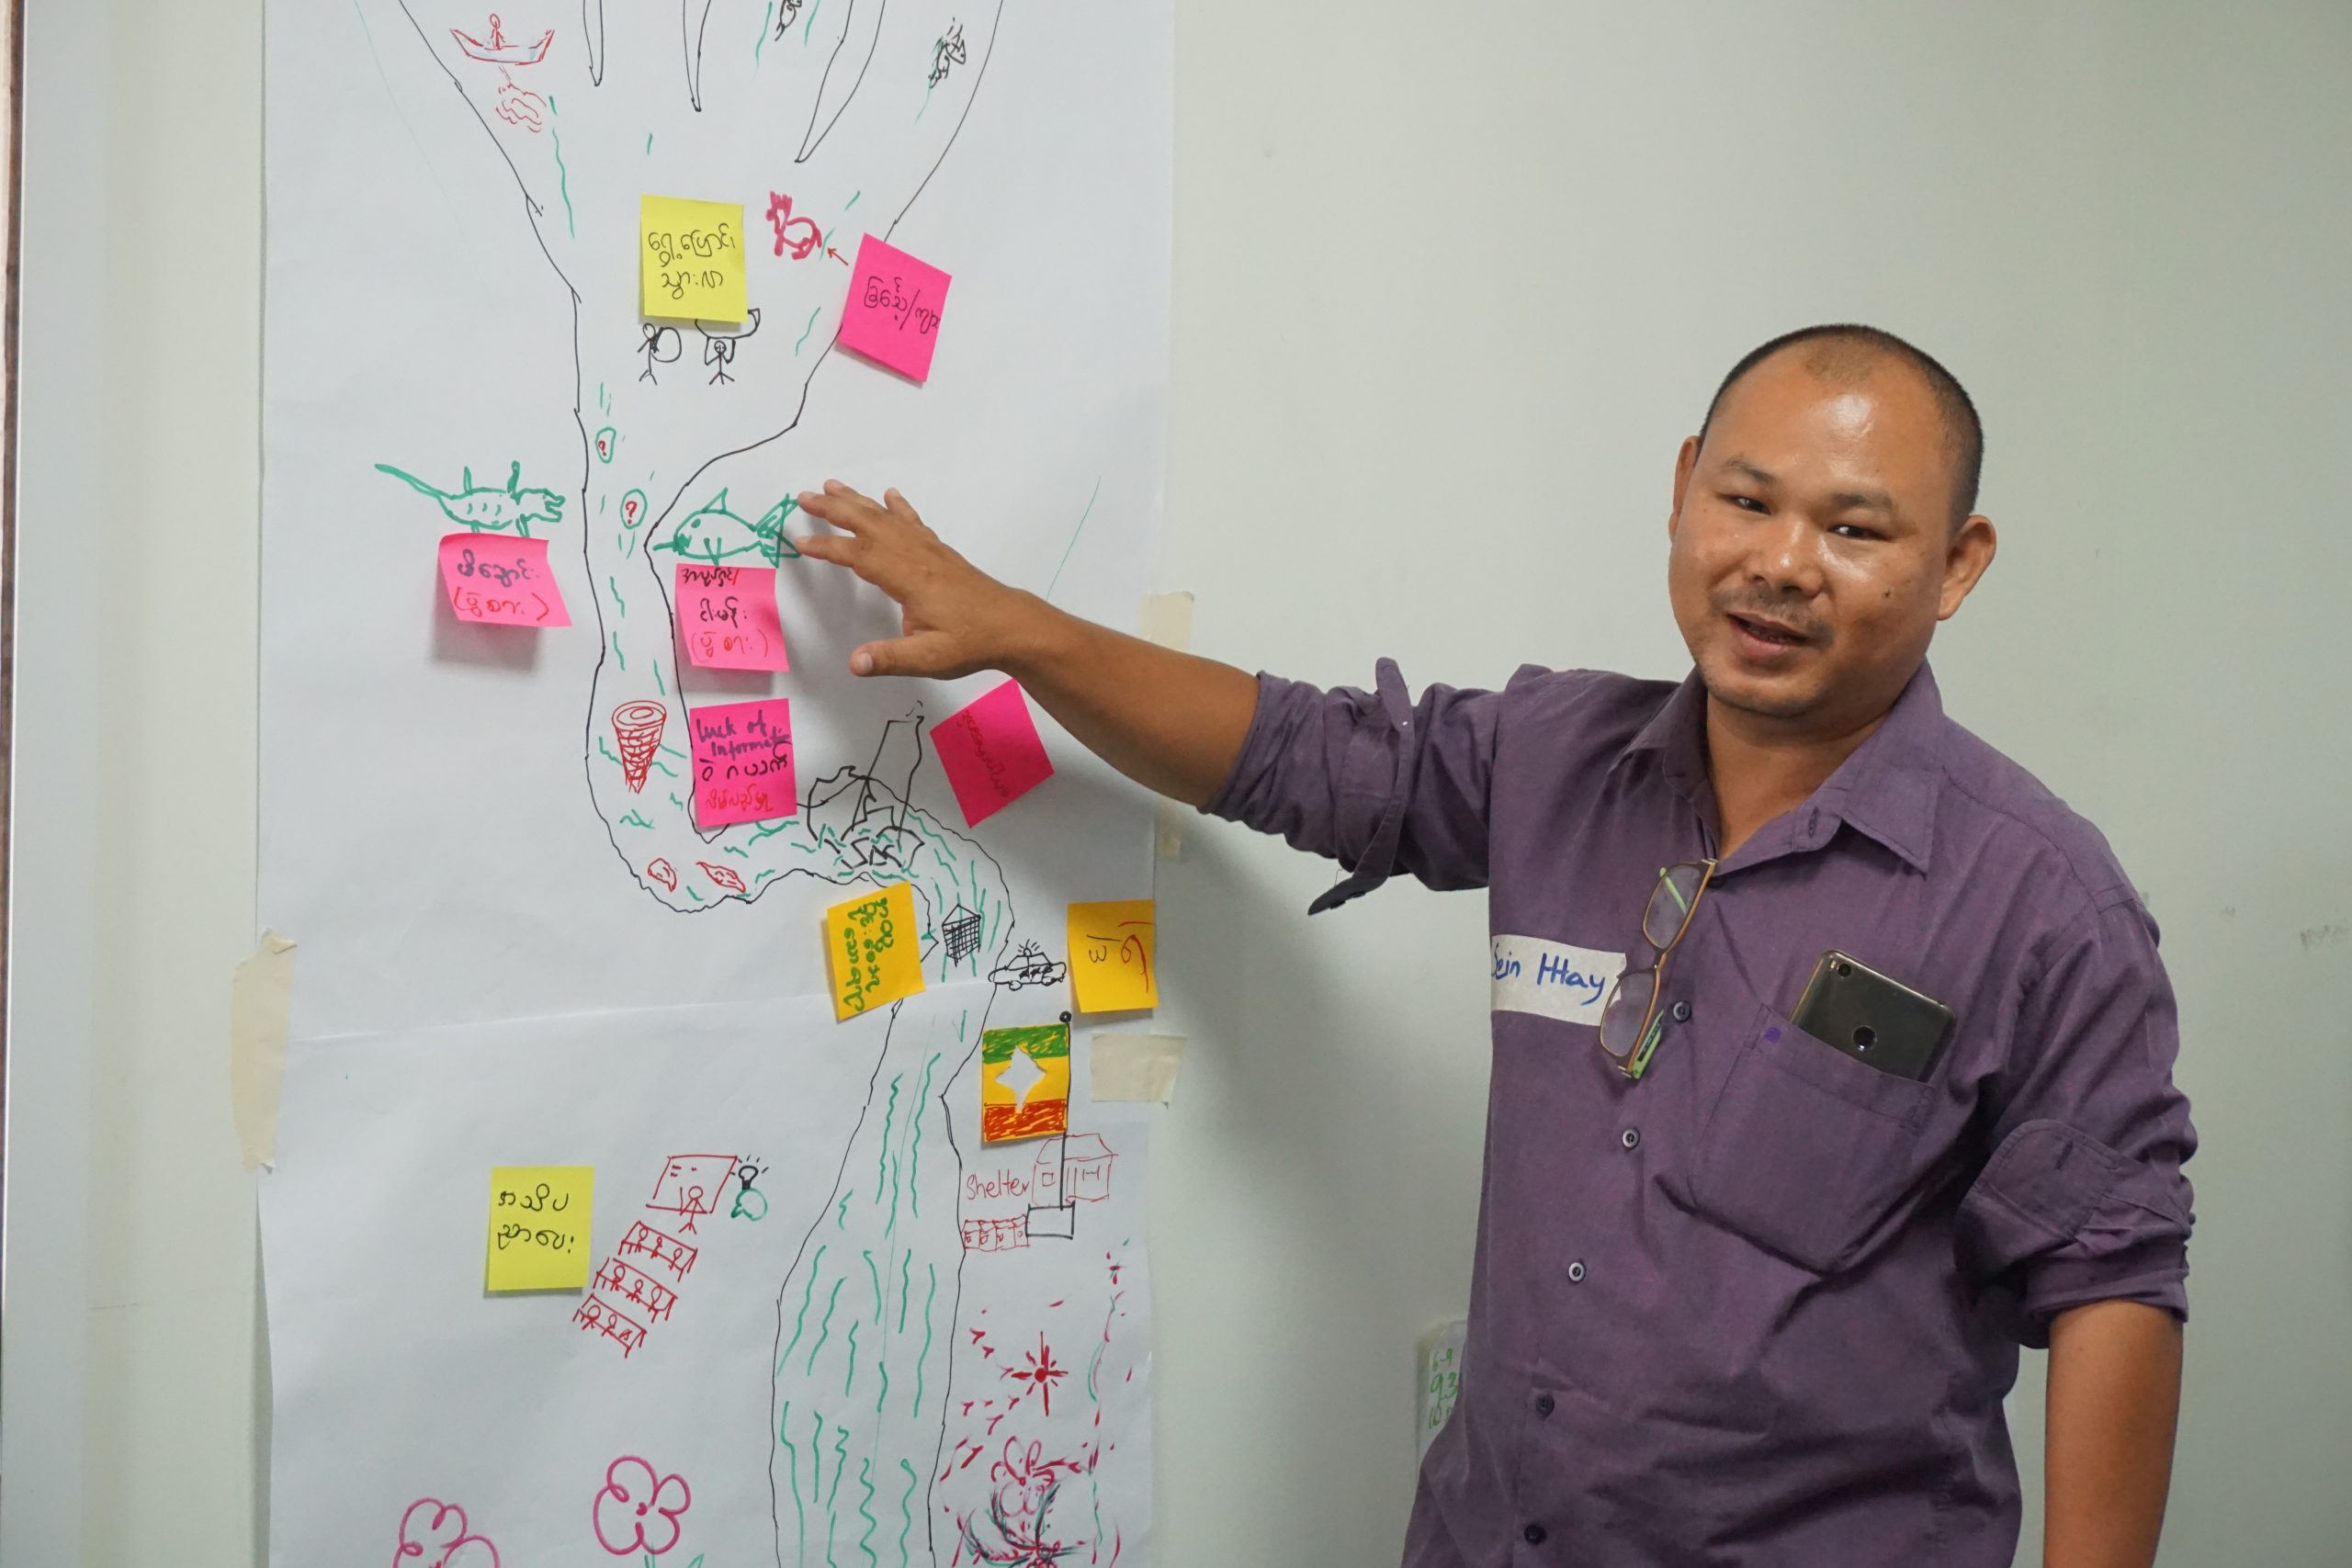 A man presents a long flipchart with a river drawing and post it notes